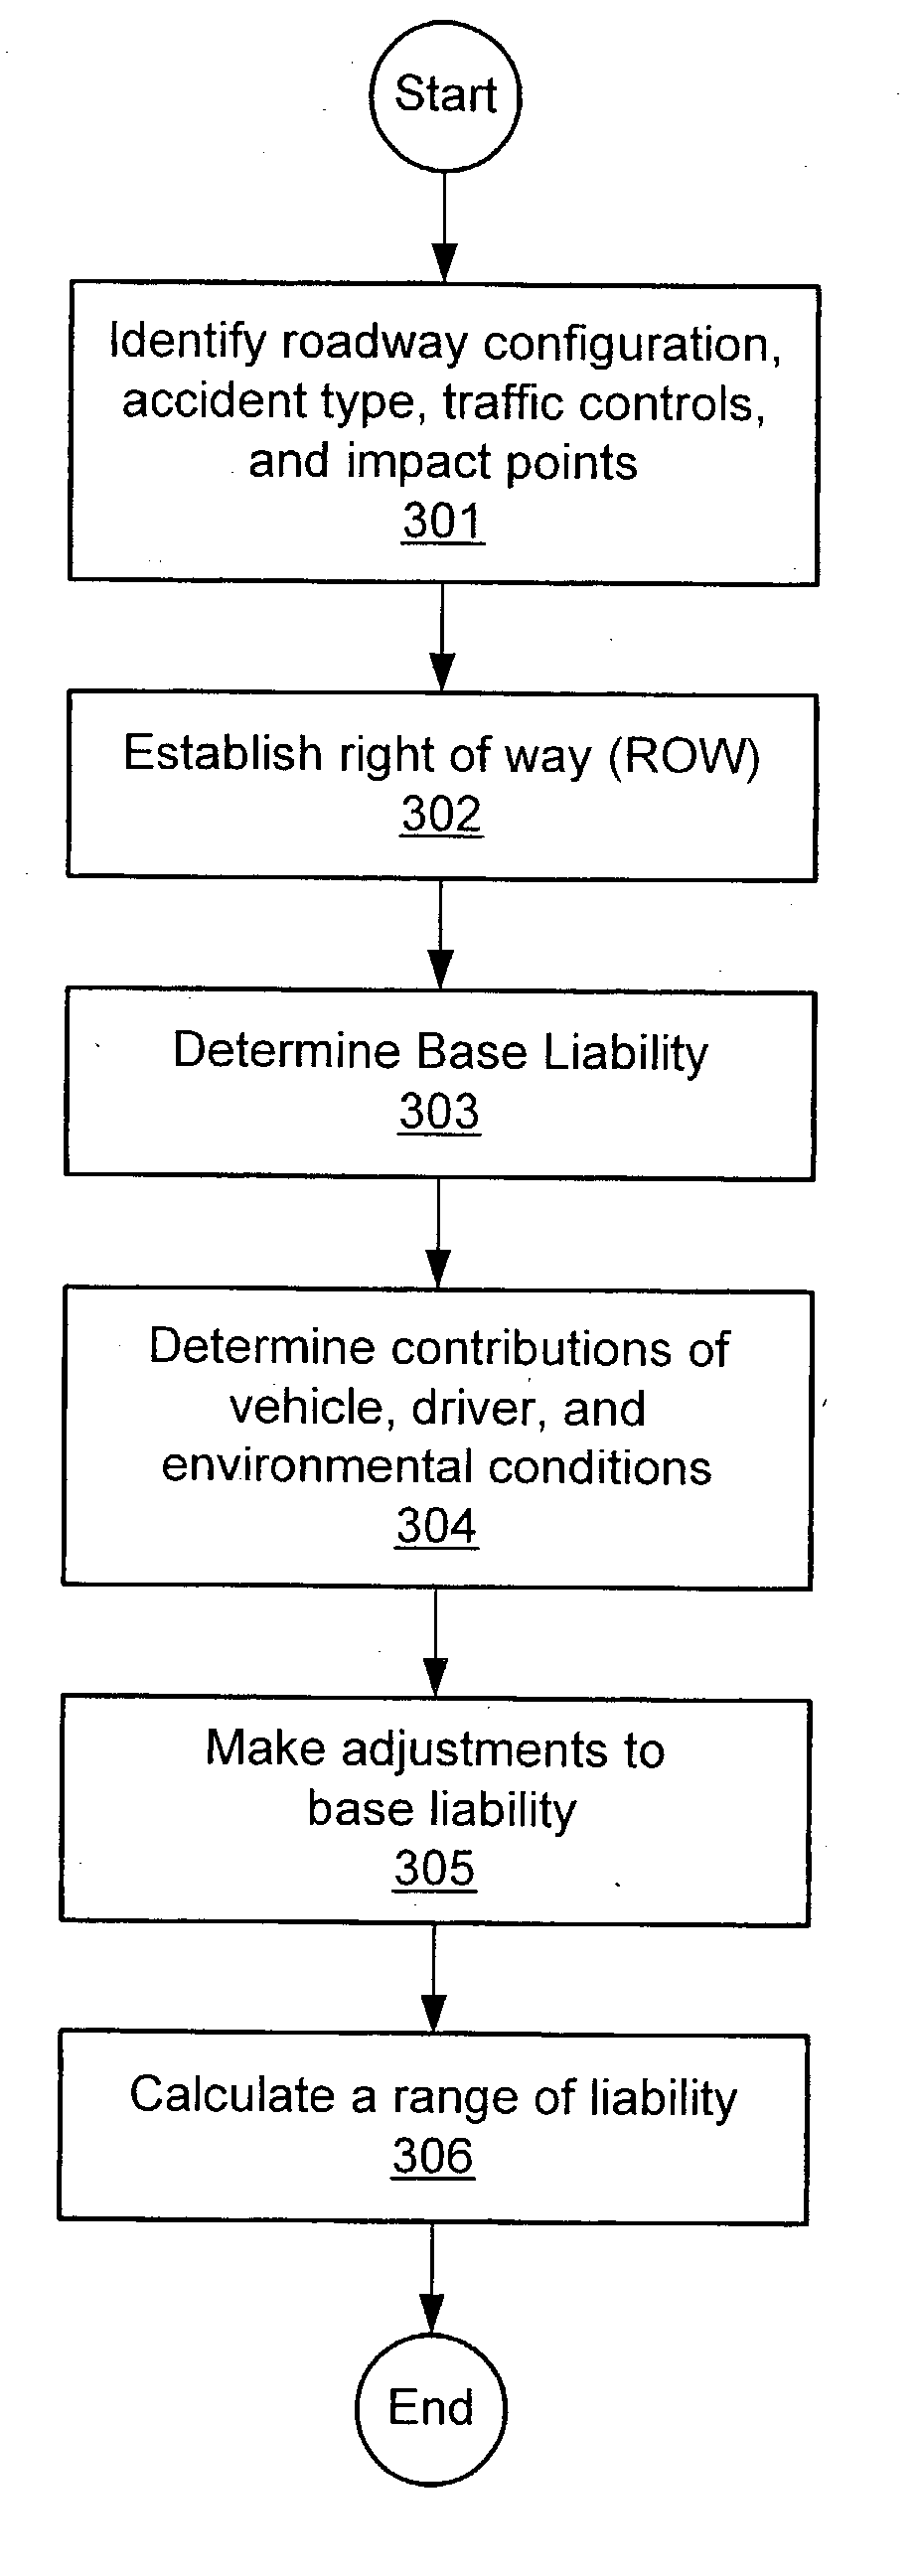 Computerized method and system for creating pre-configured claim reports including liability in an accident estimated using a computer system